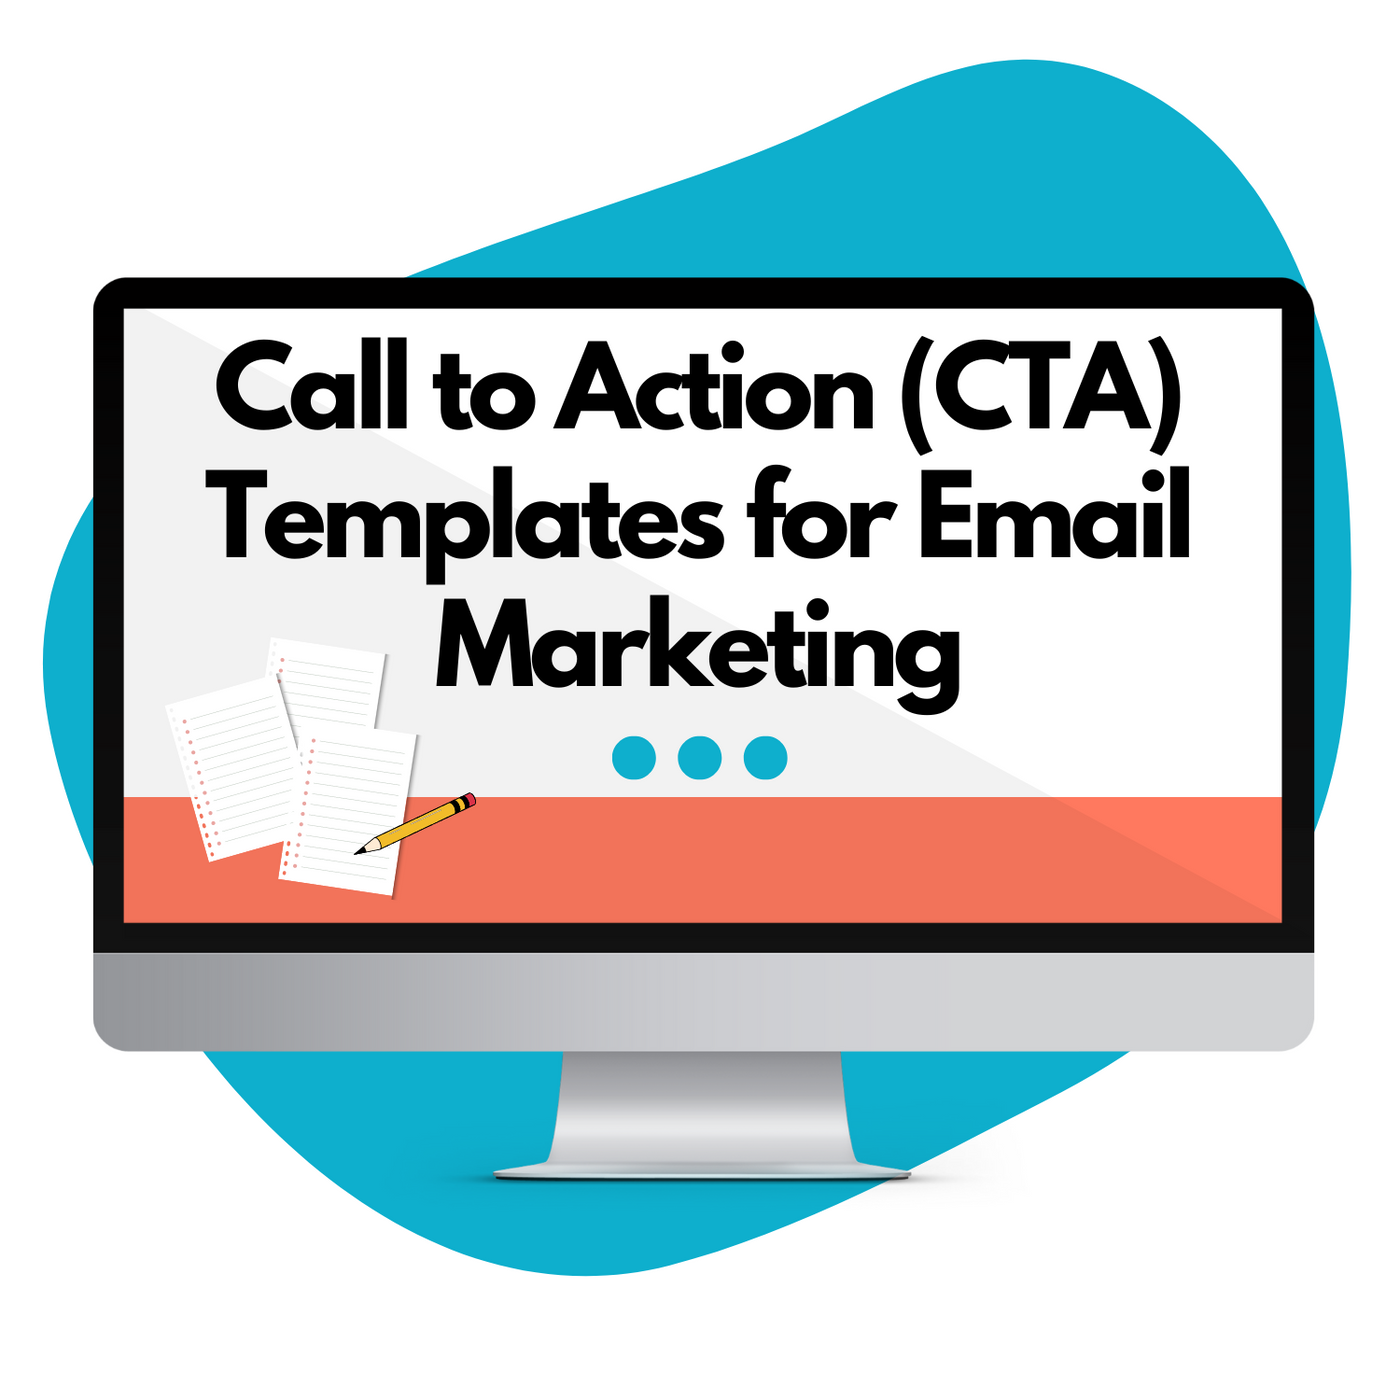 Call to Action (CTA) Templates for Email Marketing